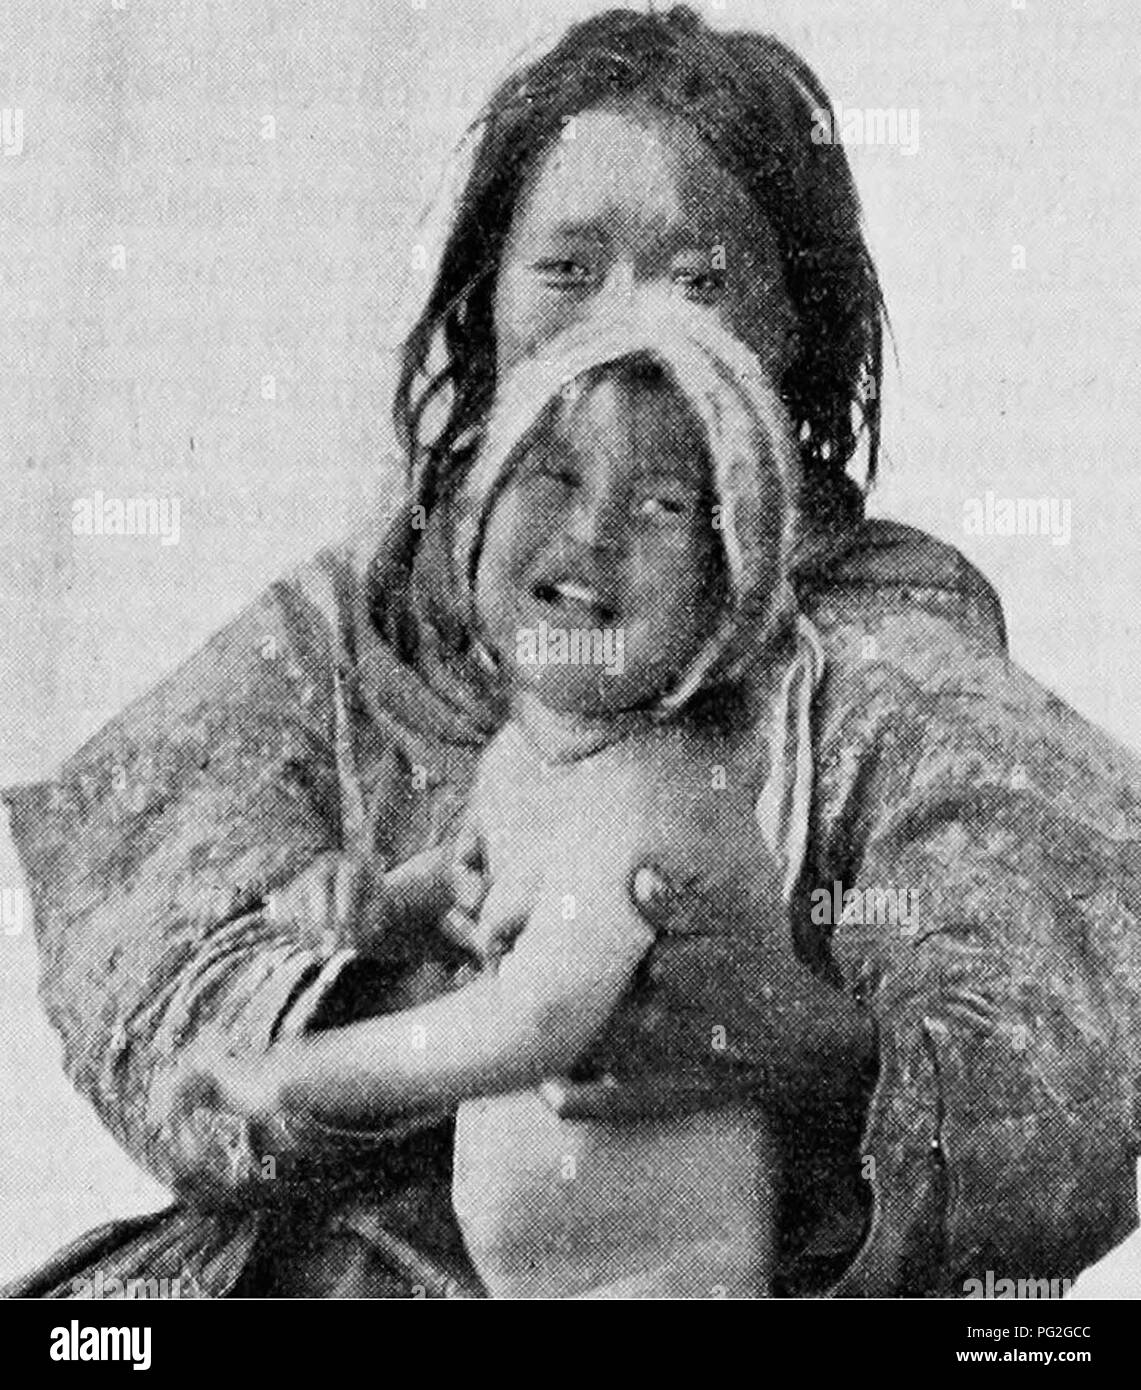 . Report of the Canadian Arctic Expedition 1913-18. Scientific expeditions. 166 Canadian Arctic Expedition, 1913-18 price of the adoption. After the baby was born, however, they decided to , keep all their children, and rather unscrupulously went back on the agreement without restoring either of the articles, the pot or the knife. Frequently the parents settle their problem by simply suffocating their baby and throwing it away. Even a mother will do this, for apparently she has no spontaneous affection for her offspring at the time that it is born. In the autumn of 1915 a Pingangnaktok native  Stock Photo